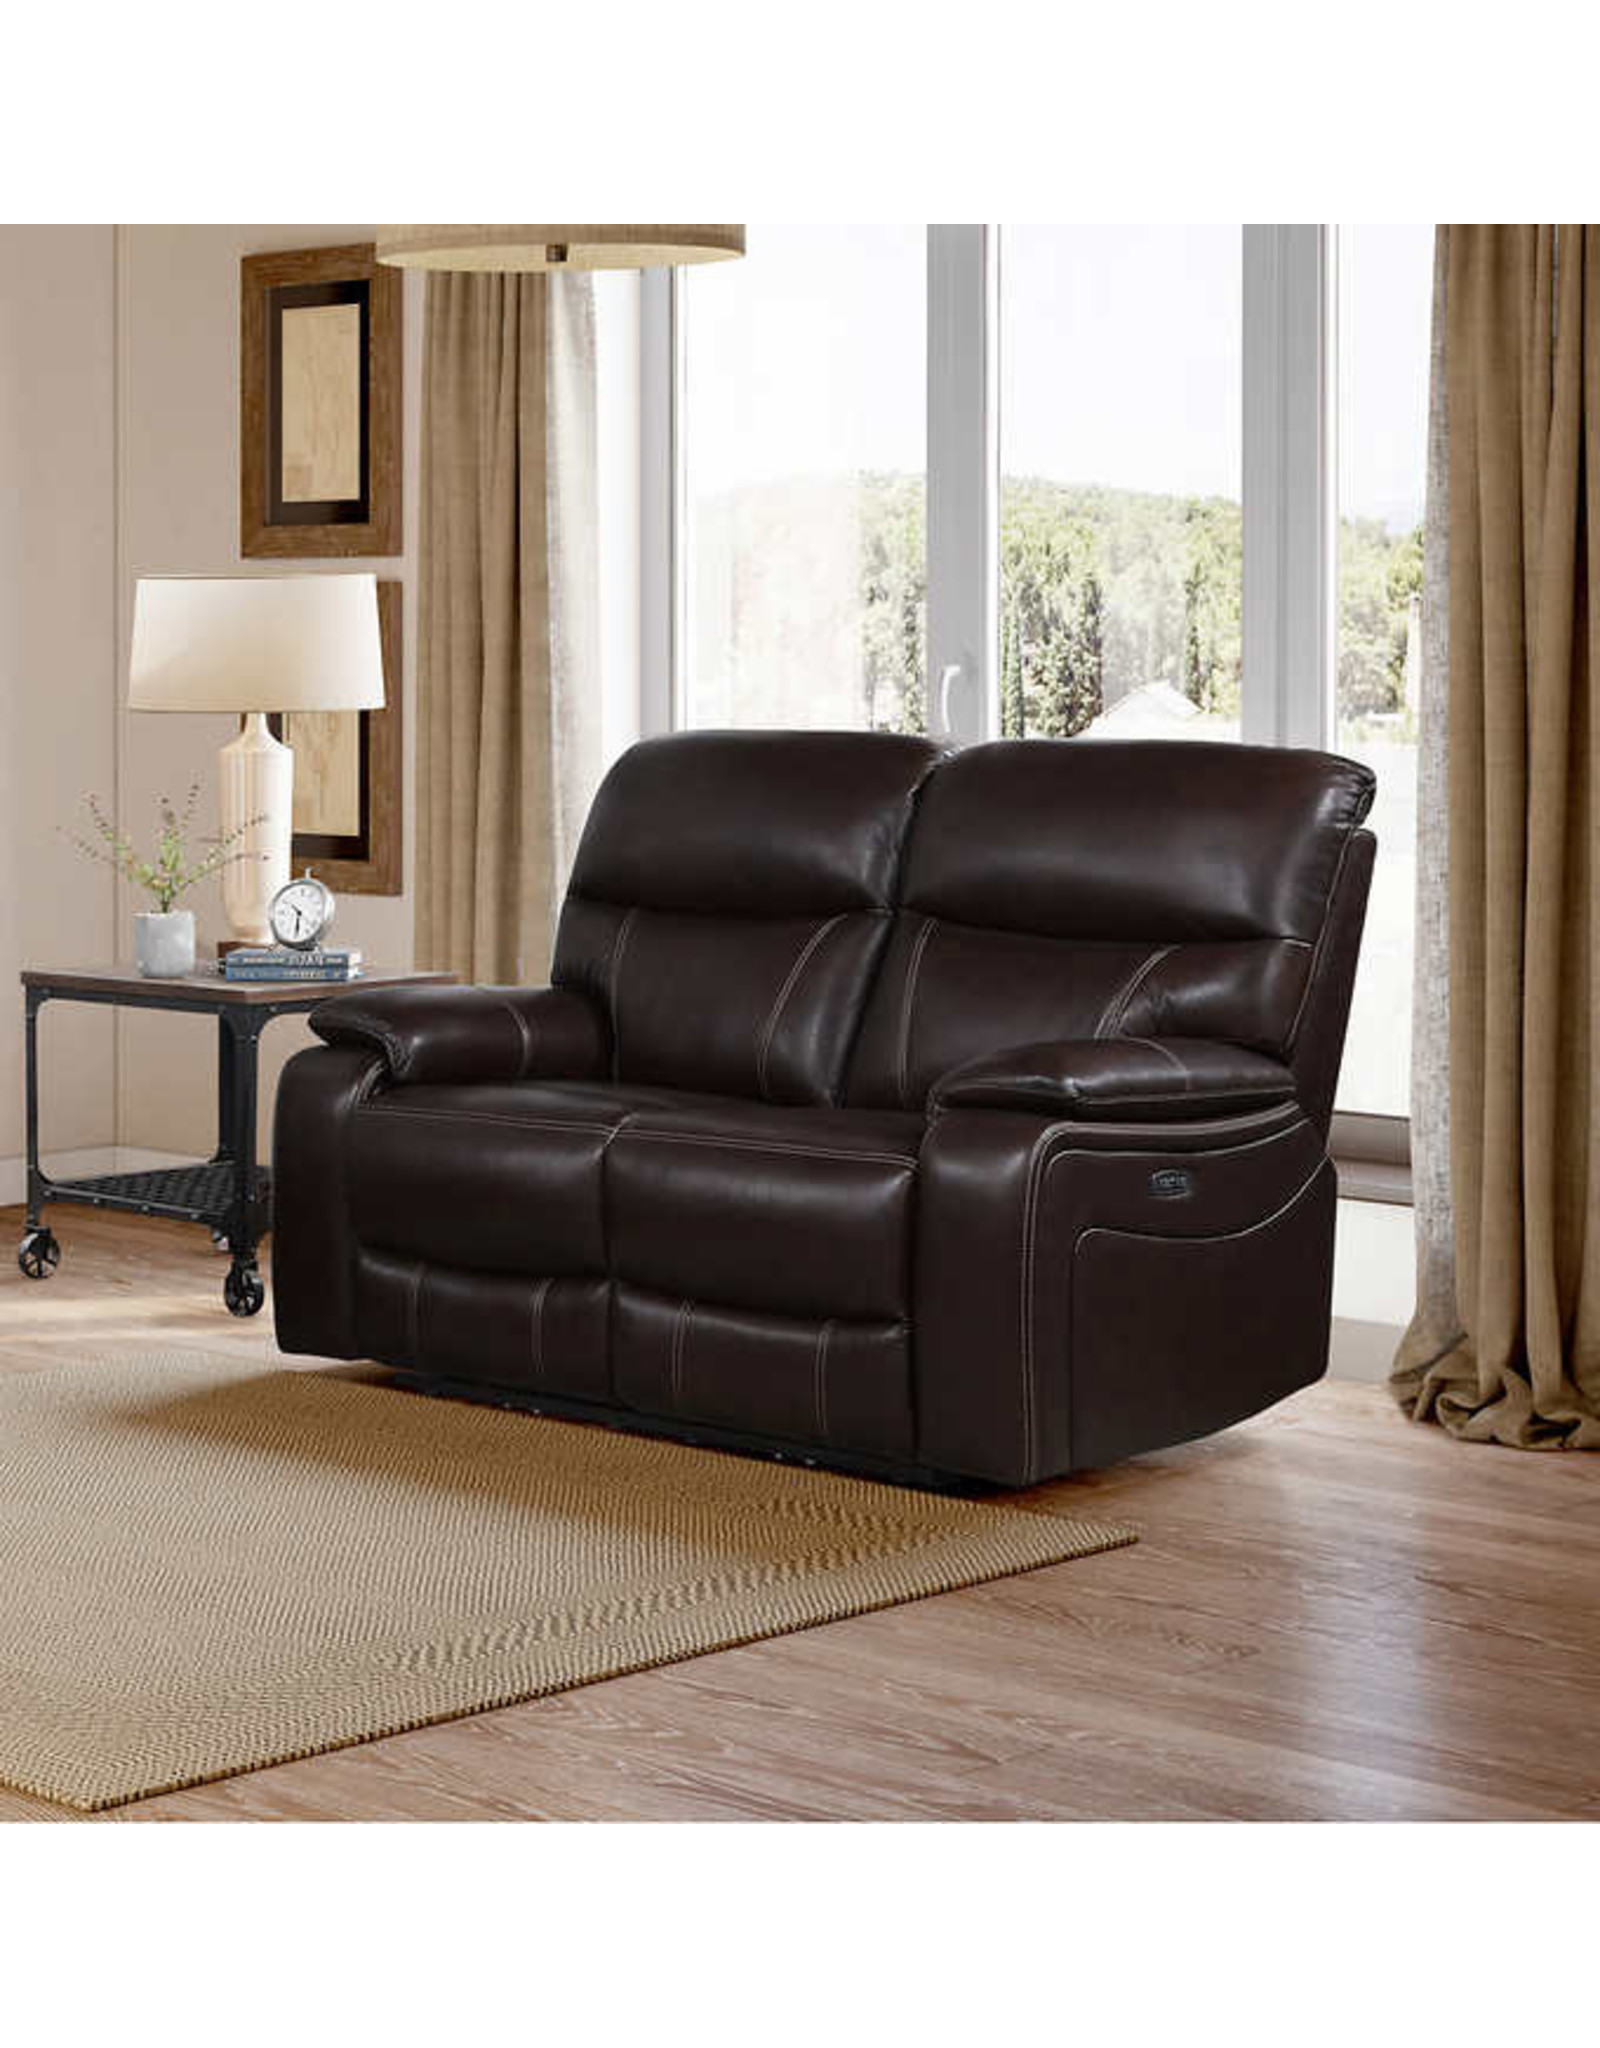 Fallon Fallon Leather Power Reclining Loveseat with Power Headrests